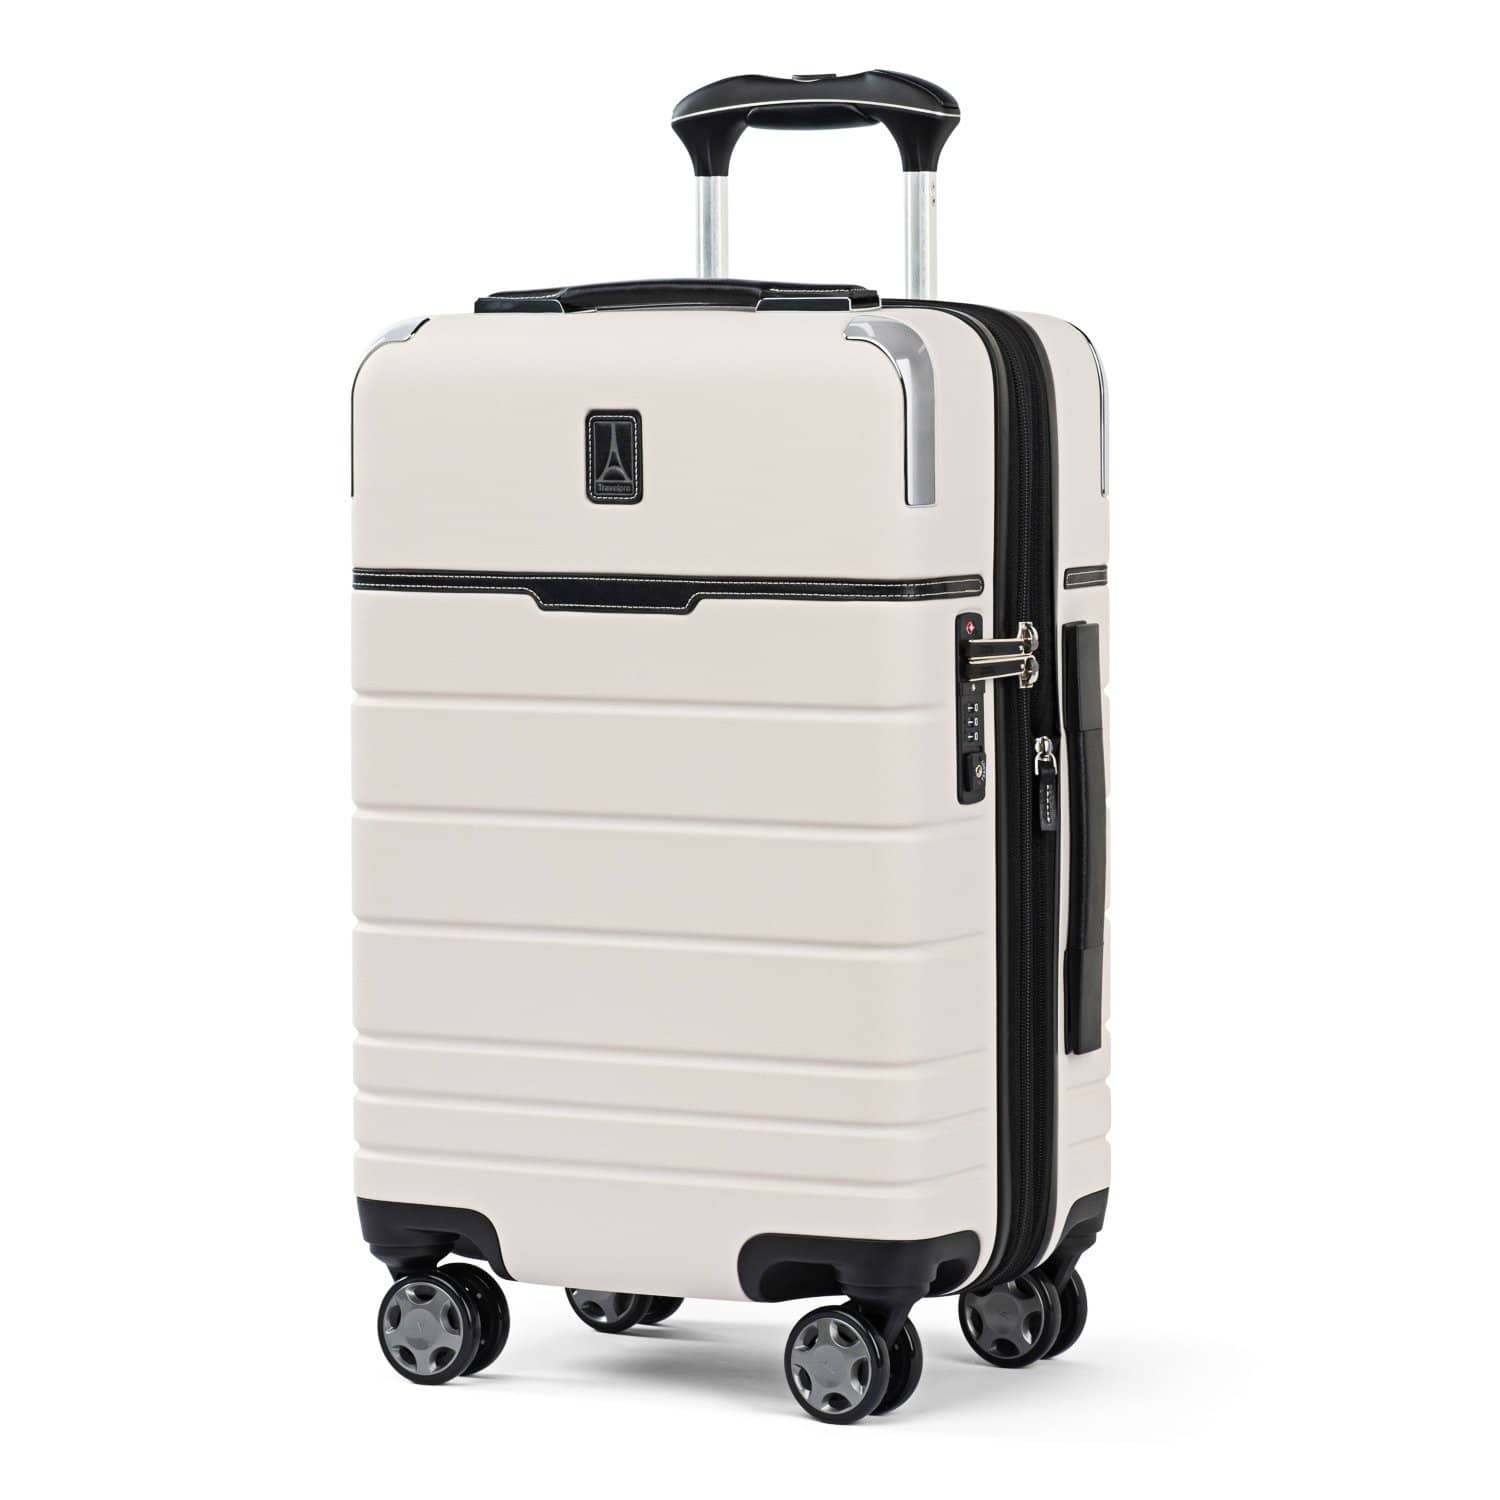 Travelpro x Travel + Leisure Carry-On Spinner Luggage in White Sand | Travel Suitcase